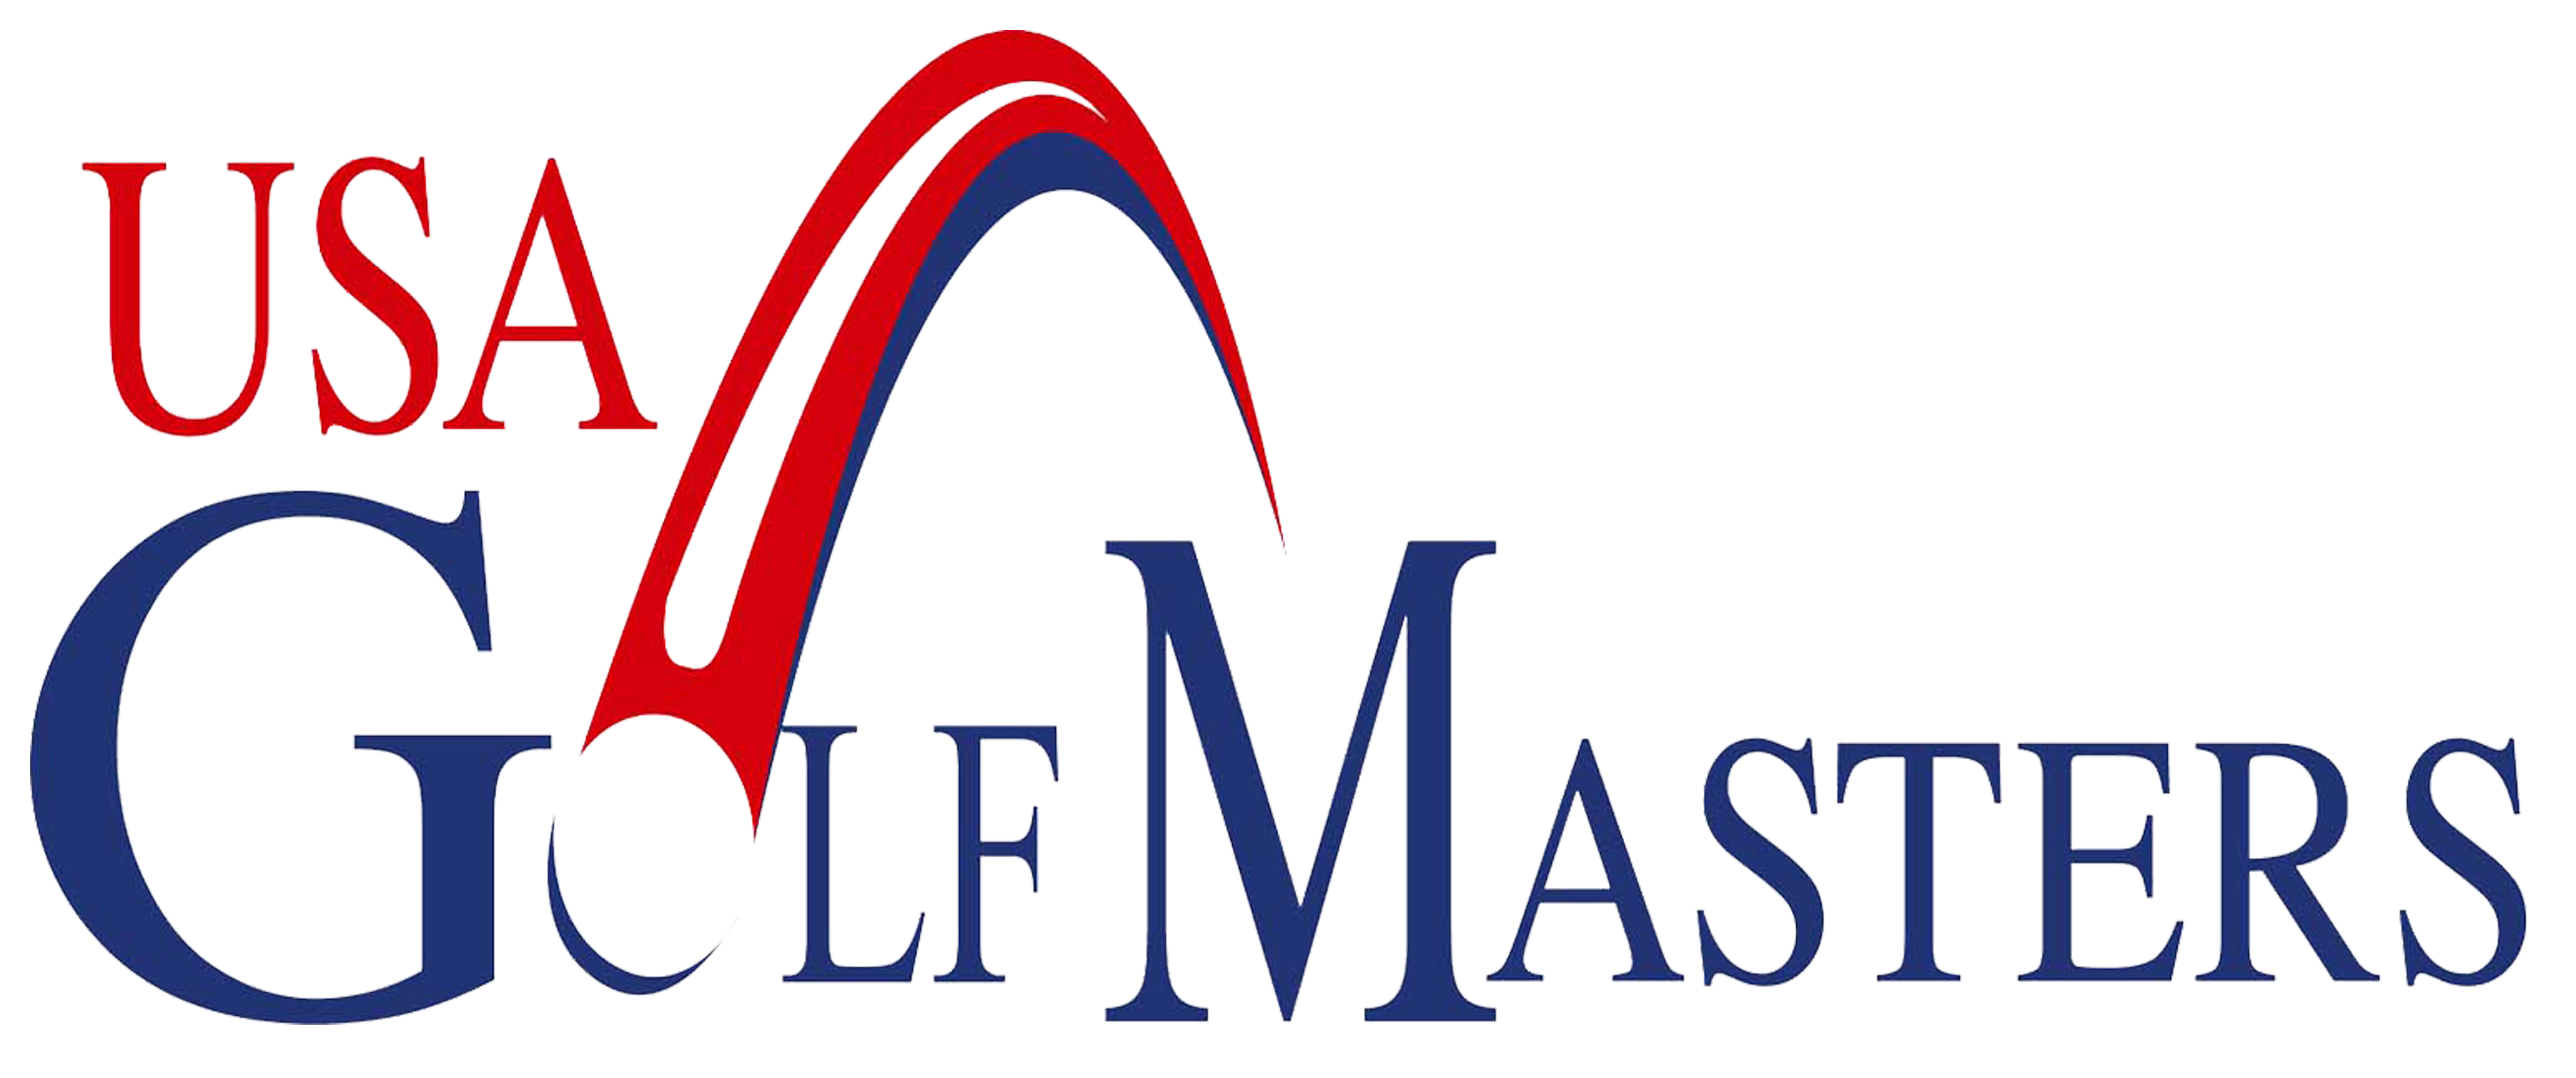 USA Golf Masters logo. Red, white, and blue.